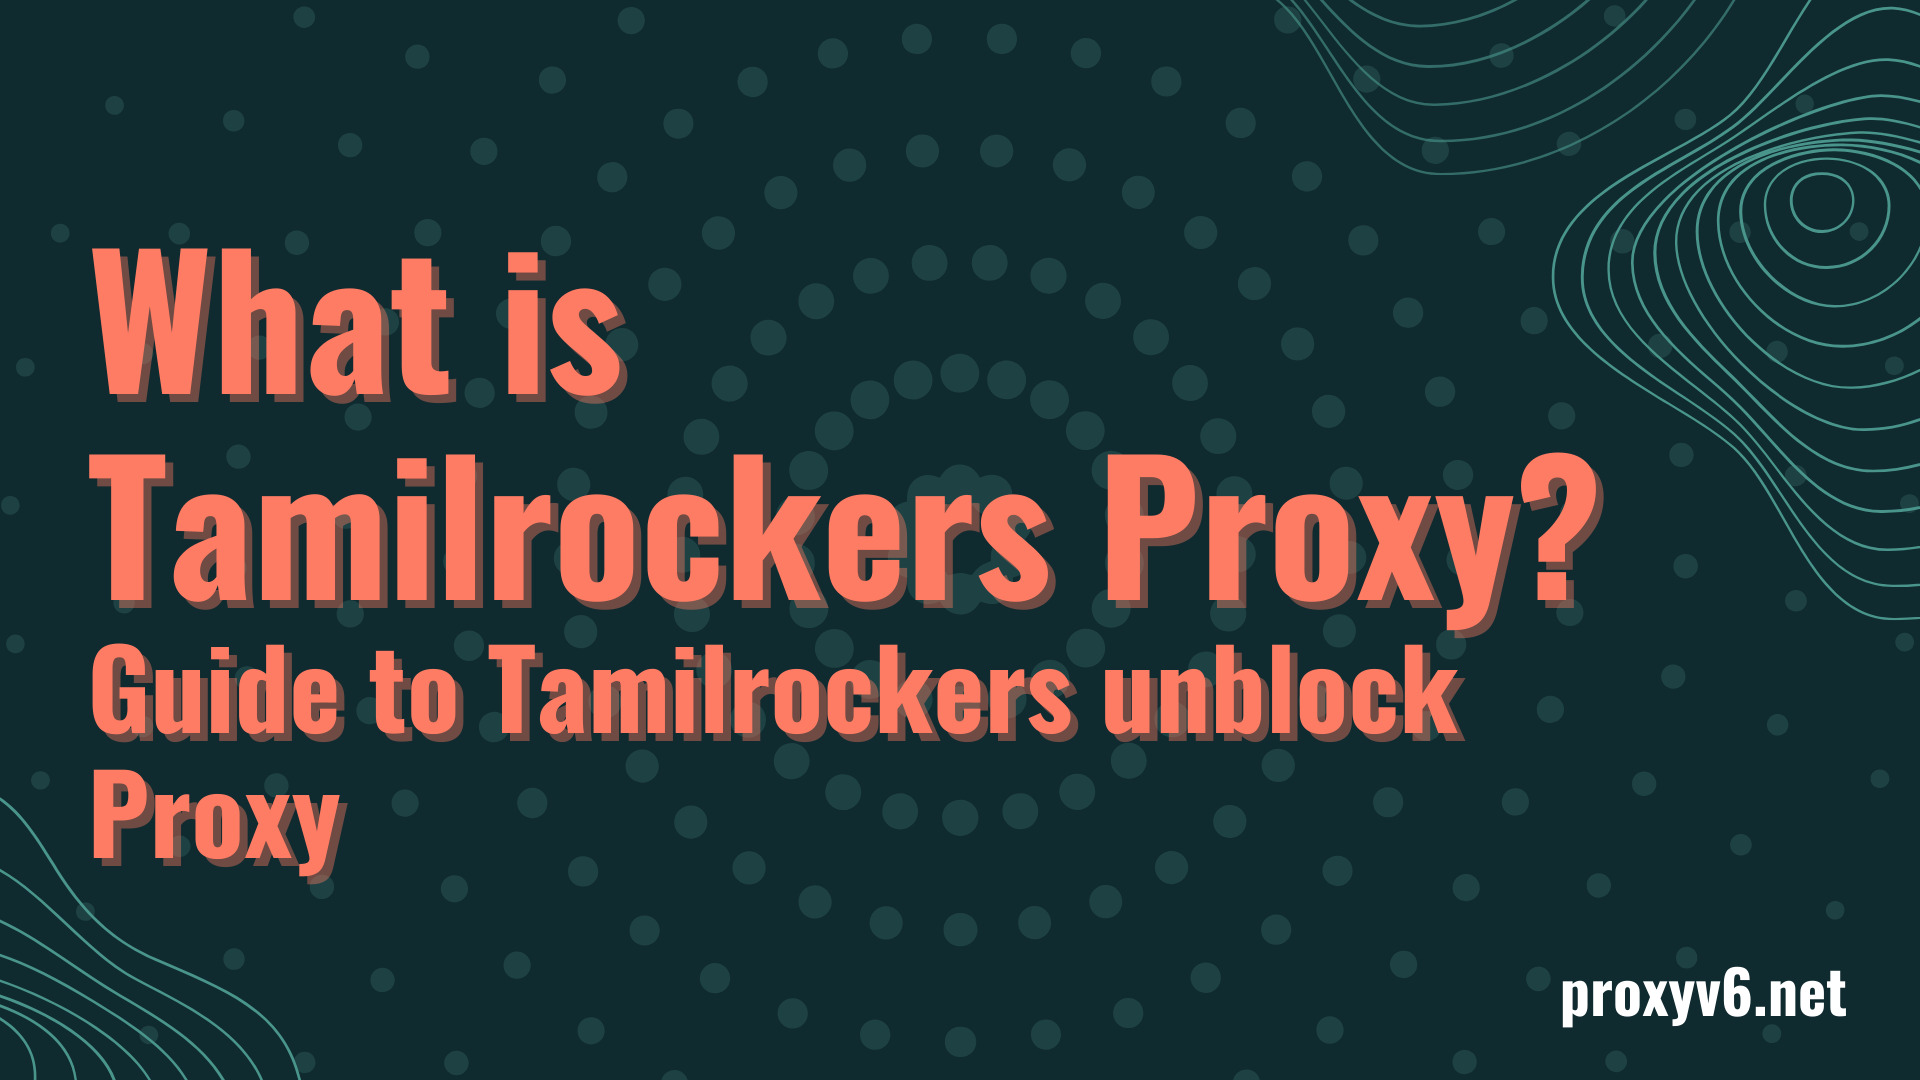 What is Tamilrockers Proxy? Guide to Tamilrockers unblock Proxy